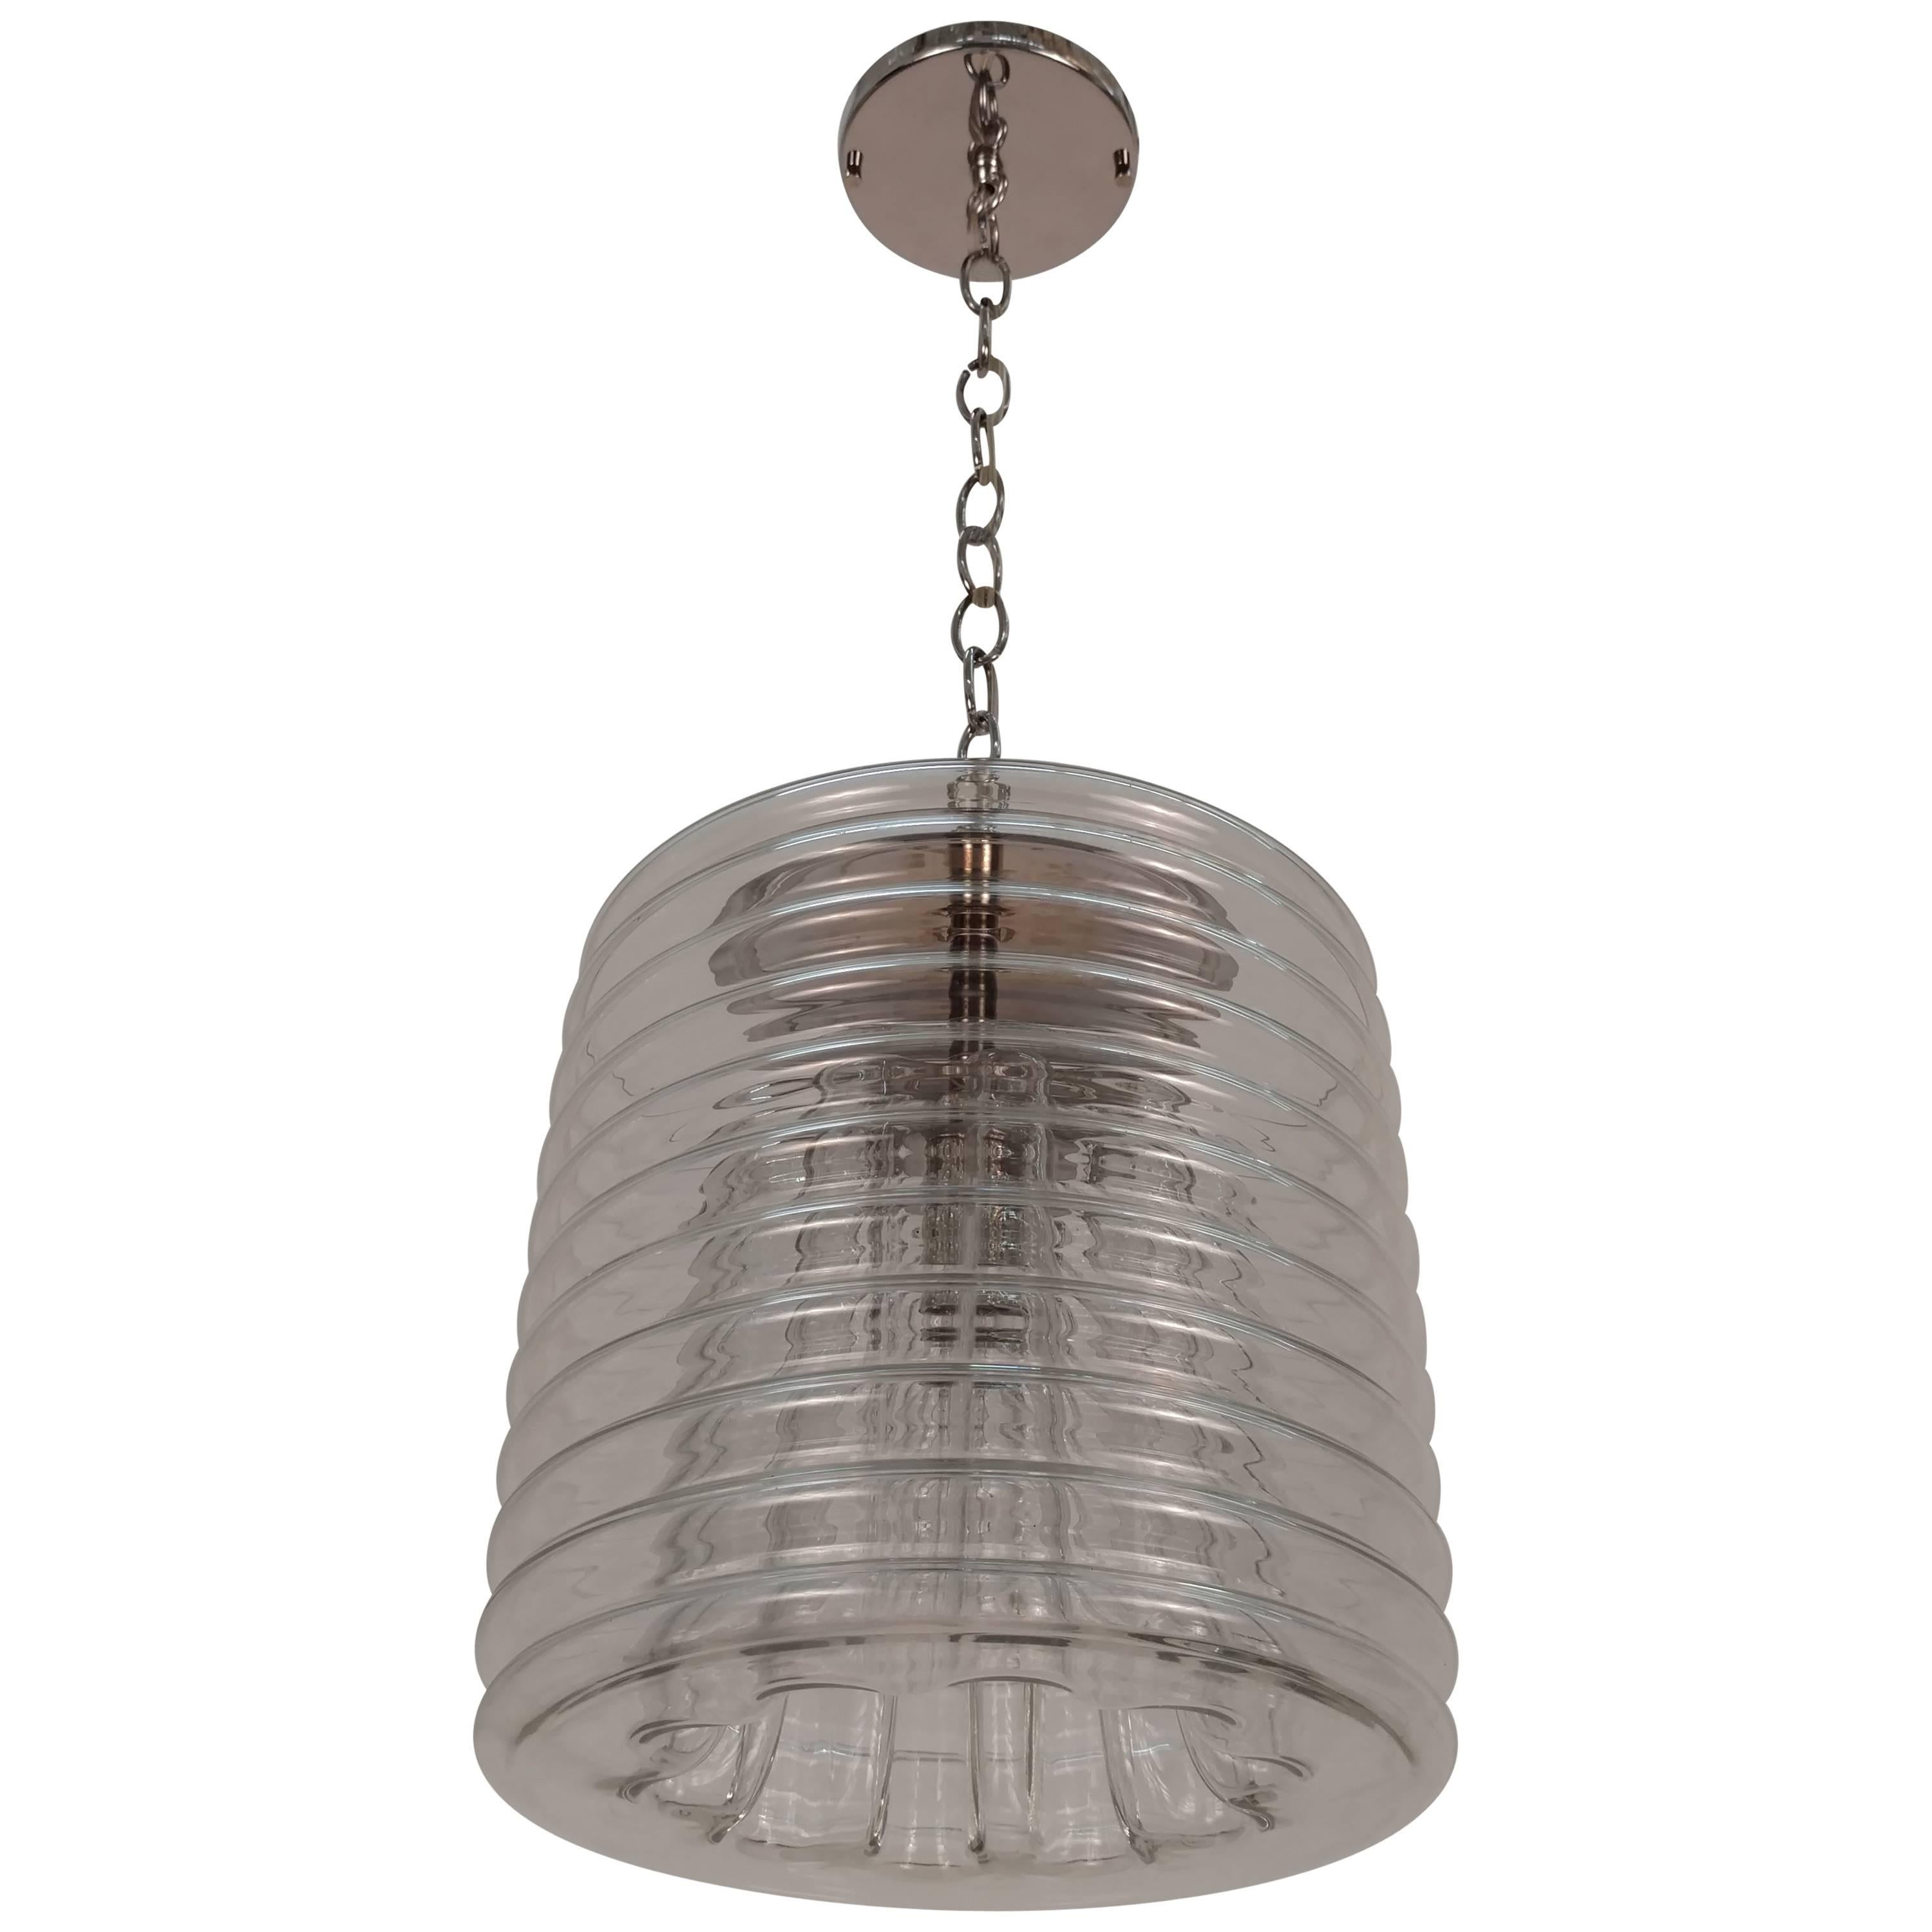 Clear Ribbed Glass Pendant